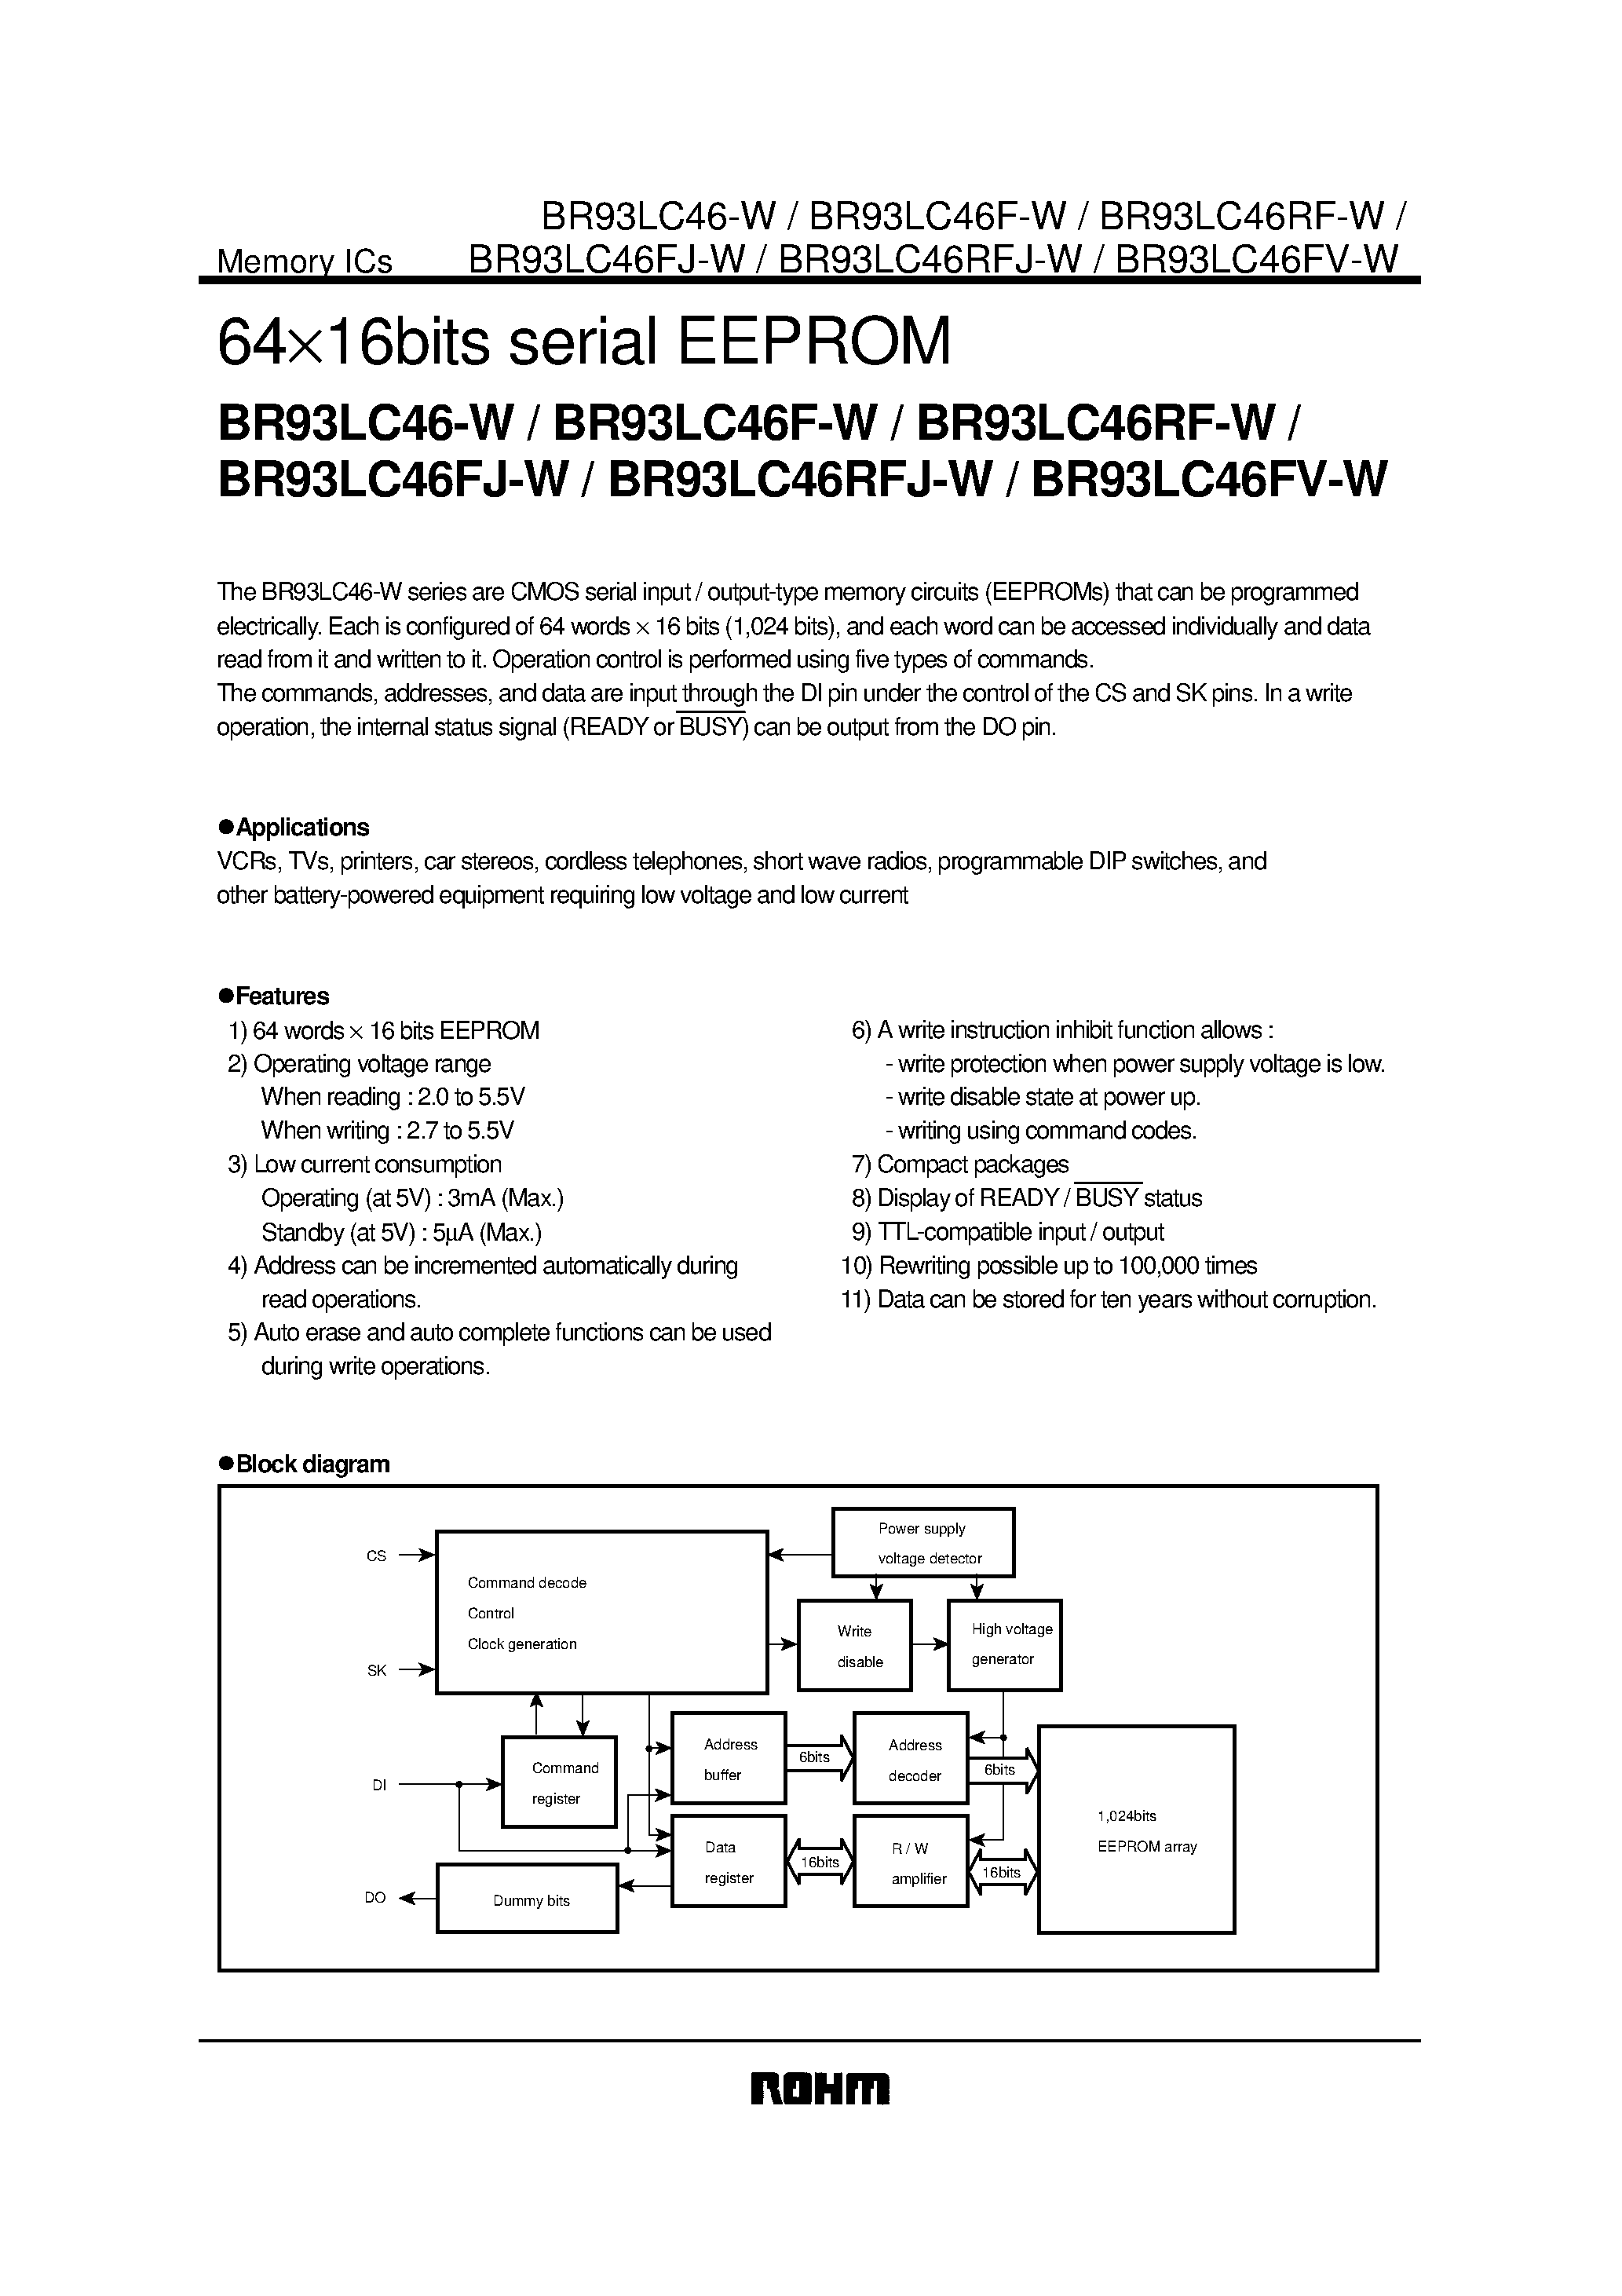 Datasheet BR93LC46F-W - 6416bits serial EEPROM page 1